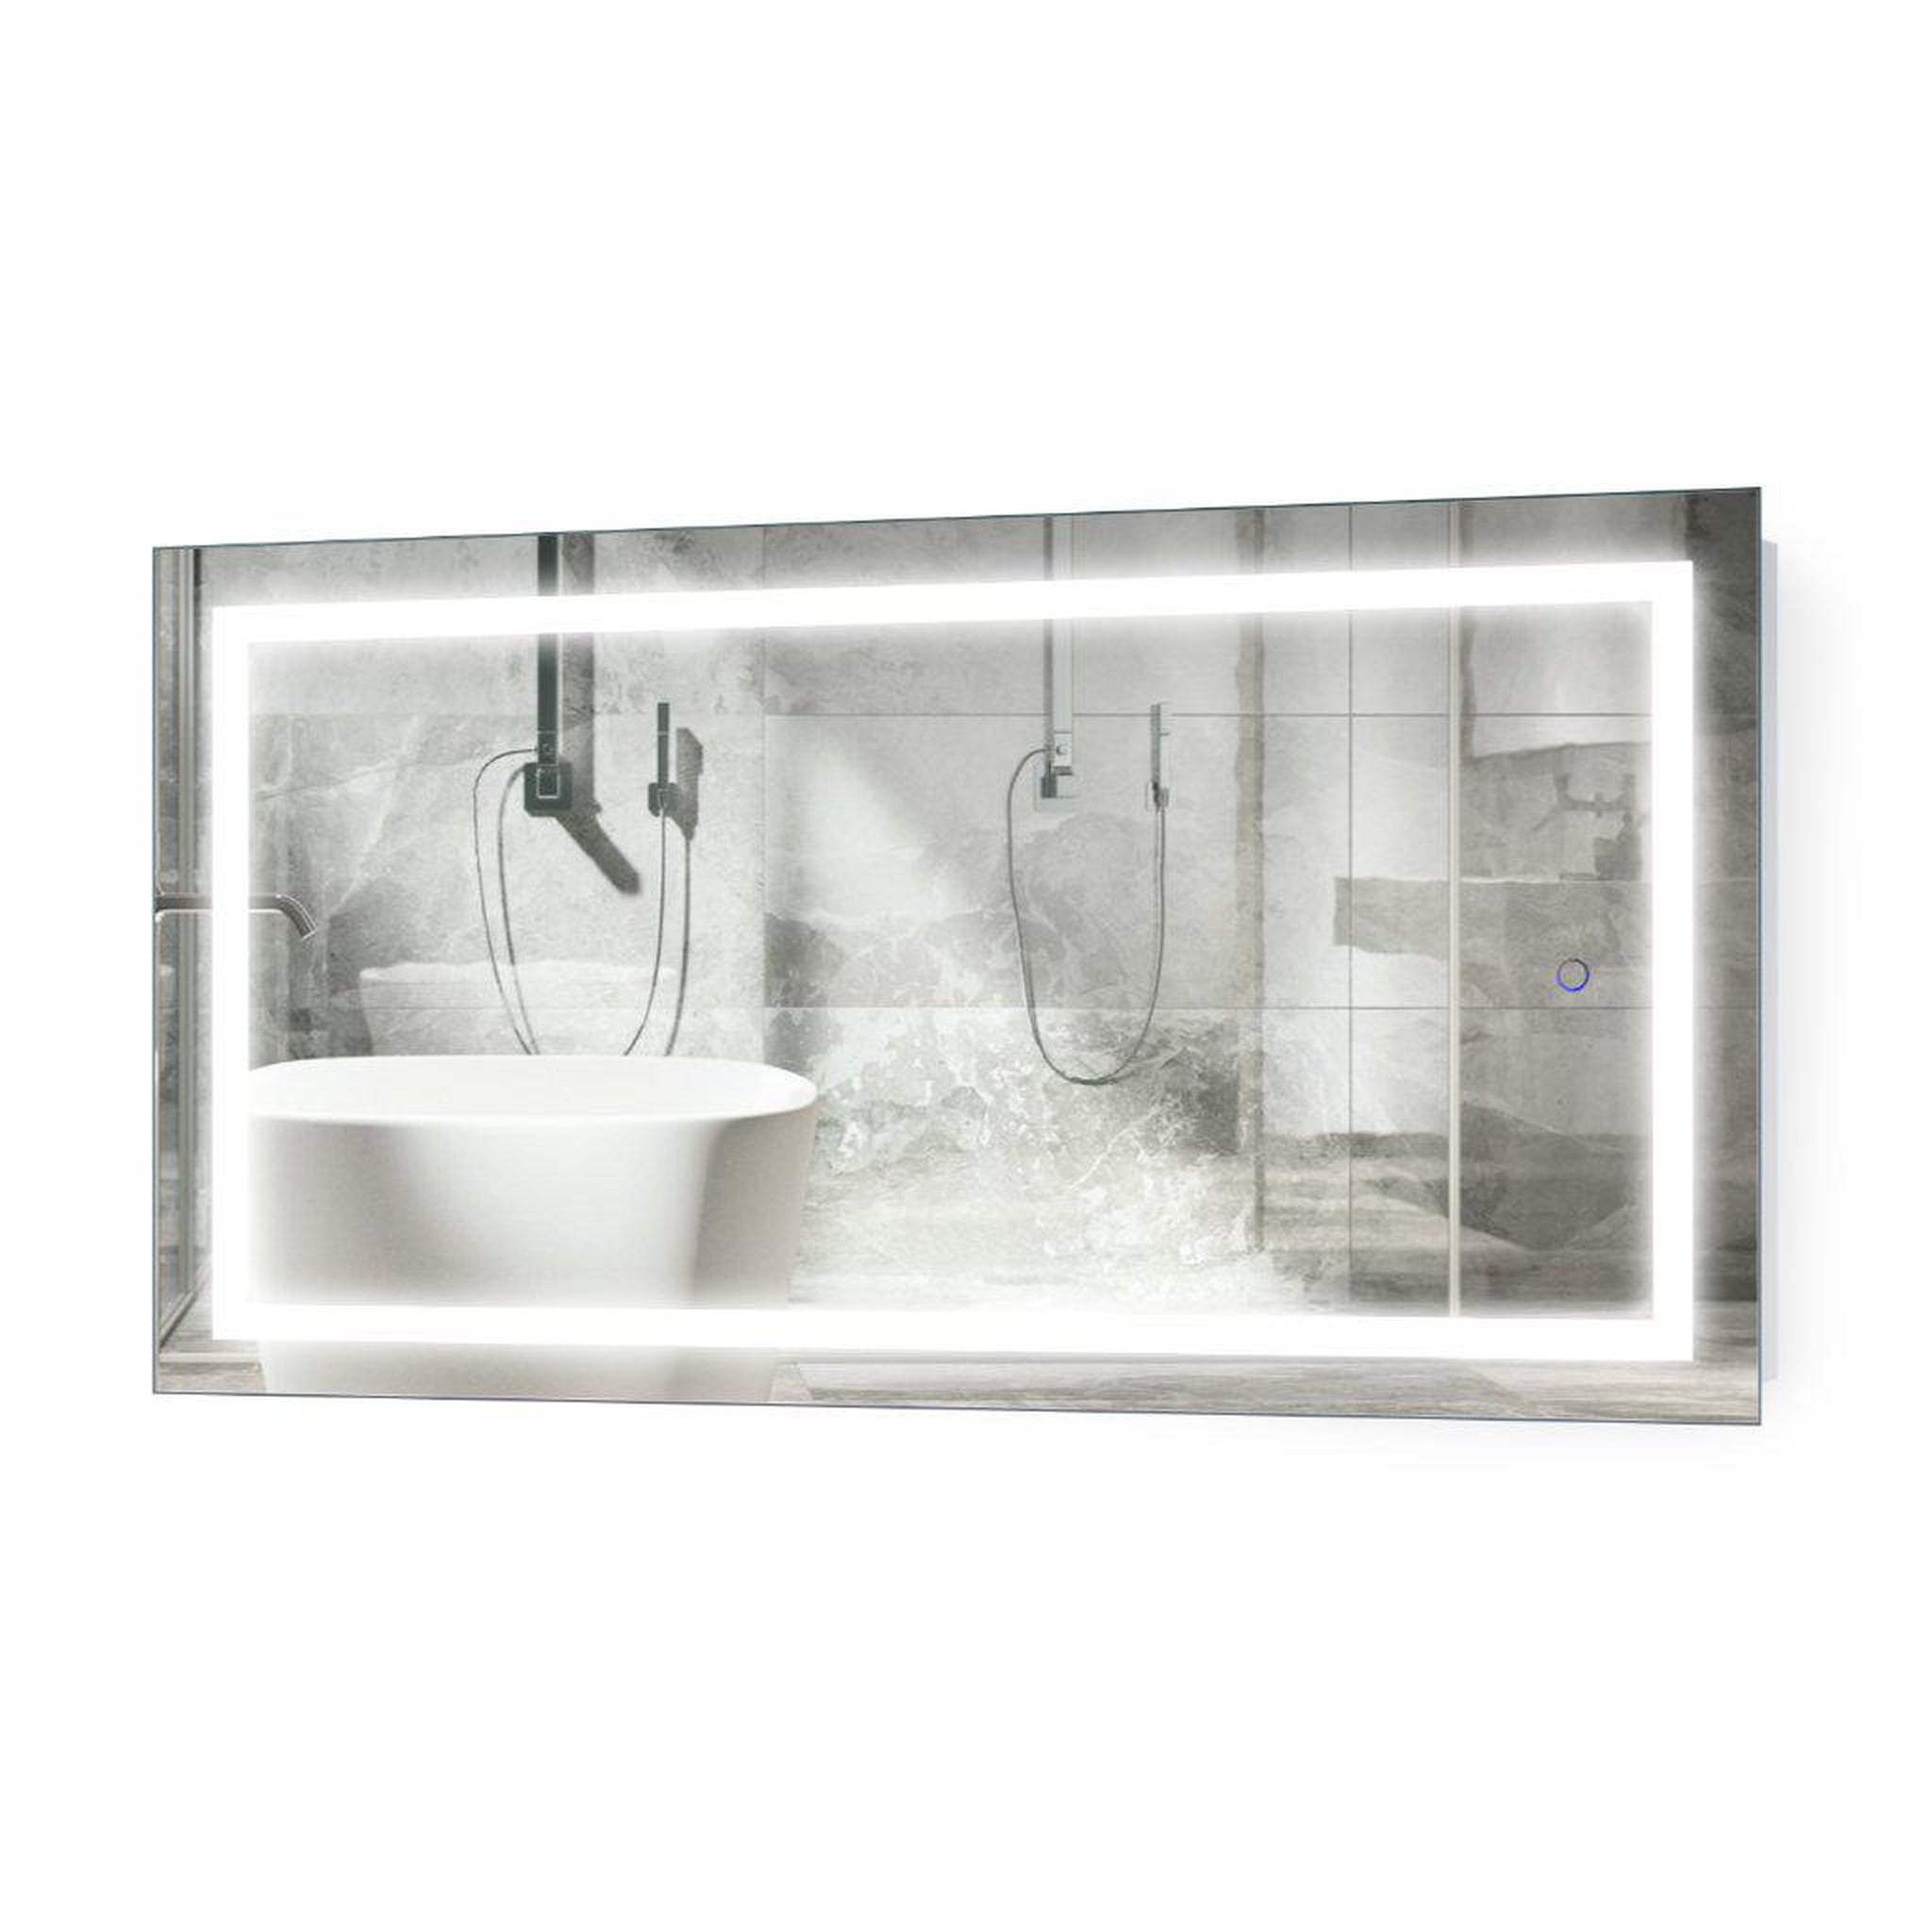 Krugg Reflections, Krugg Reflections Icon 42” x 24” 5000K Rectangular Wall-Mounted Illuminated Silver Backed LED Mirror With Built-in Defogger and Touch Sensor On/Off Built-in Dimmer